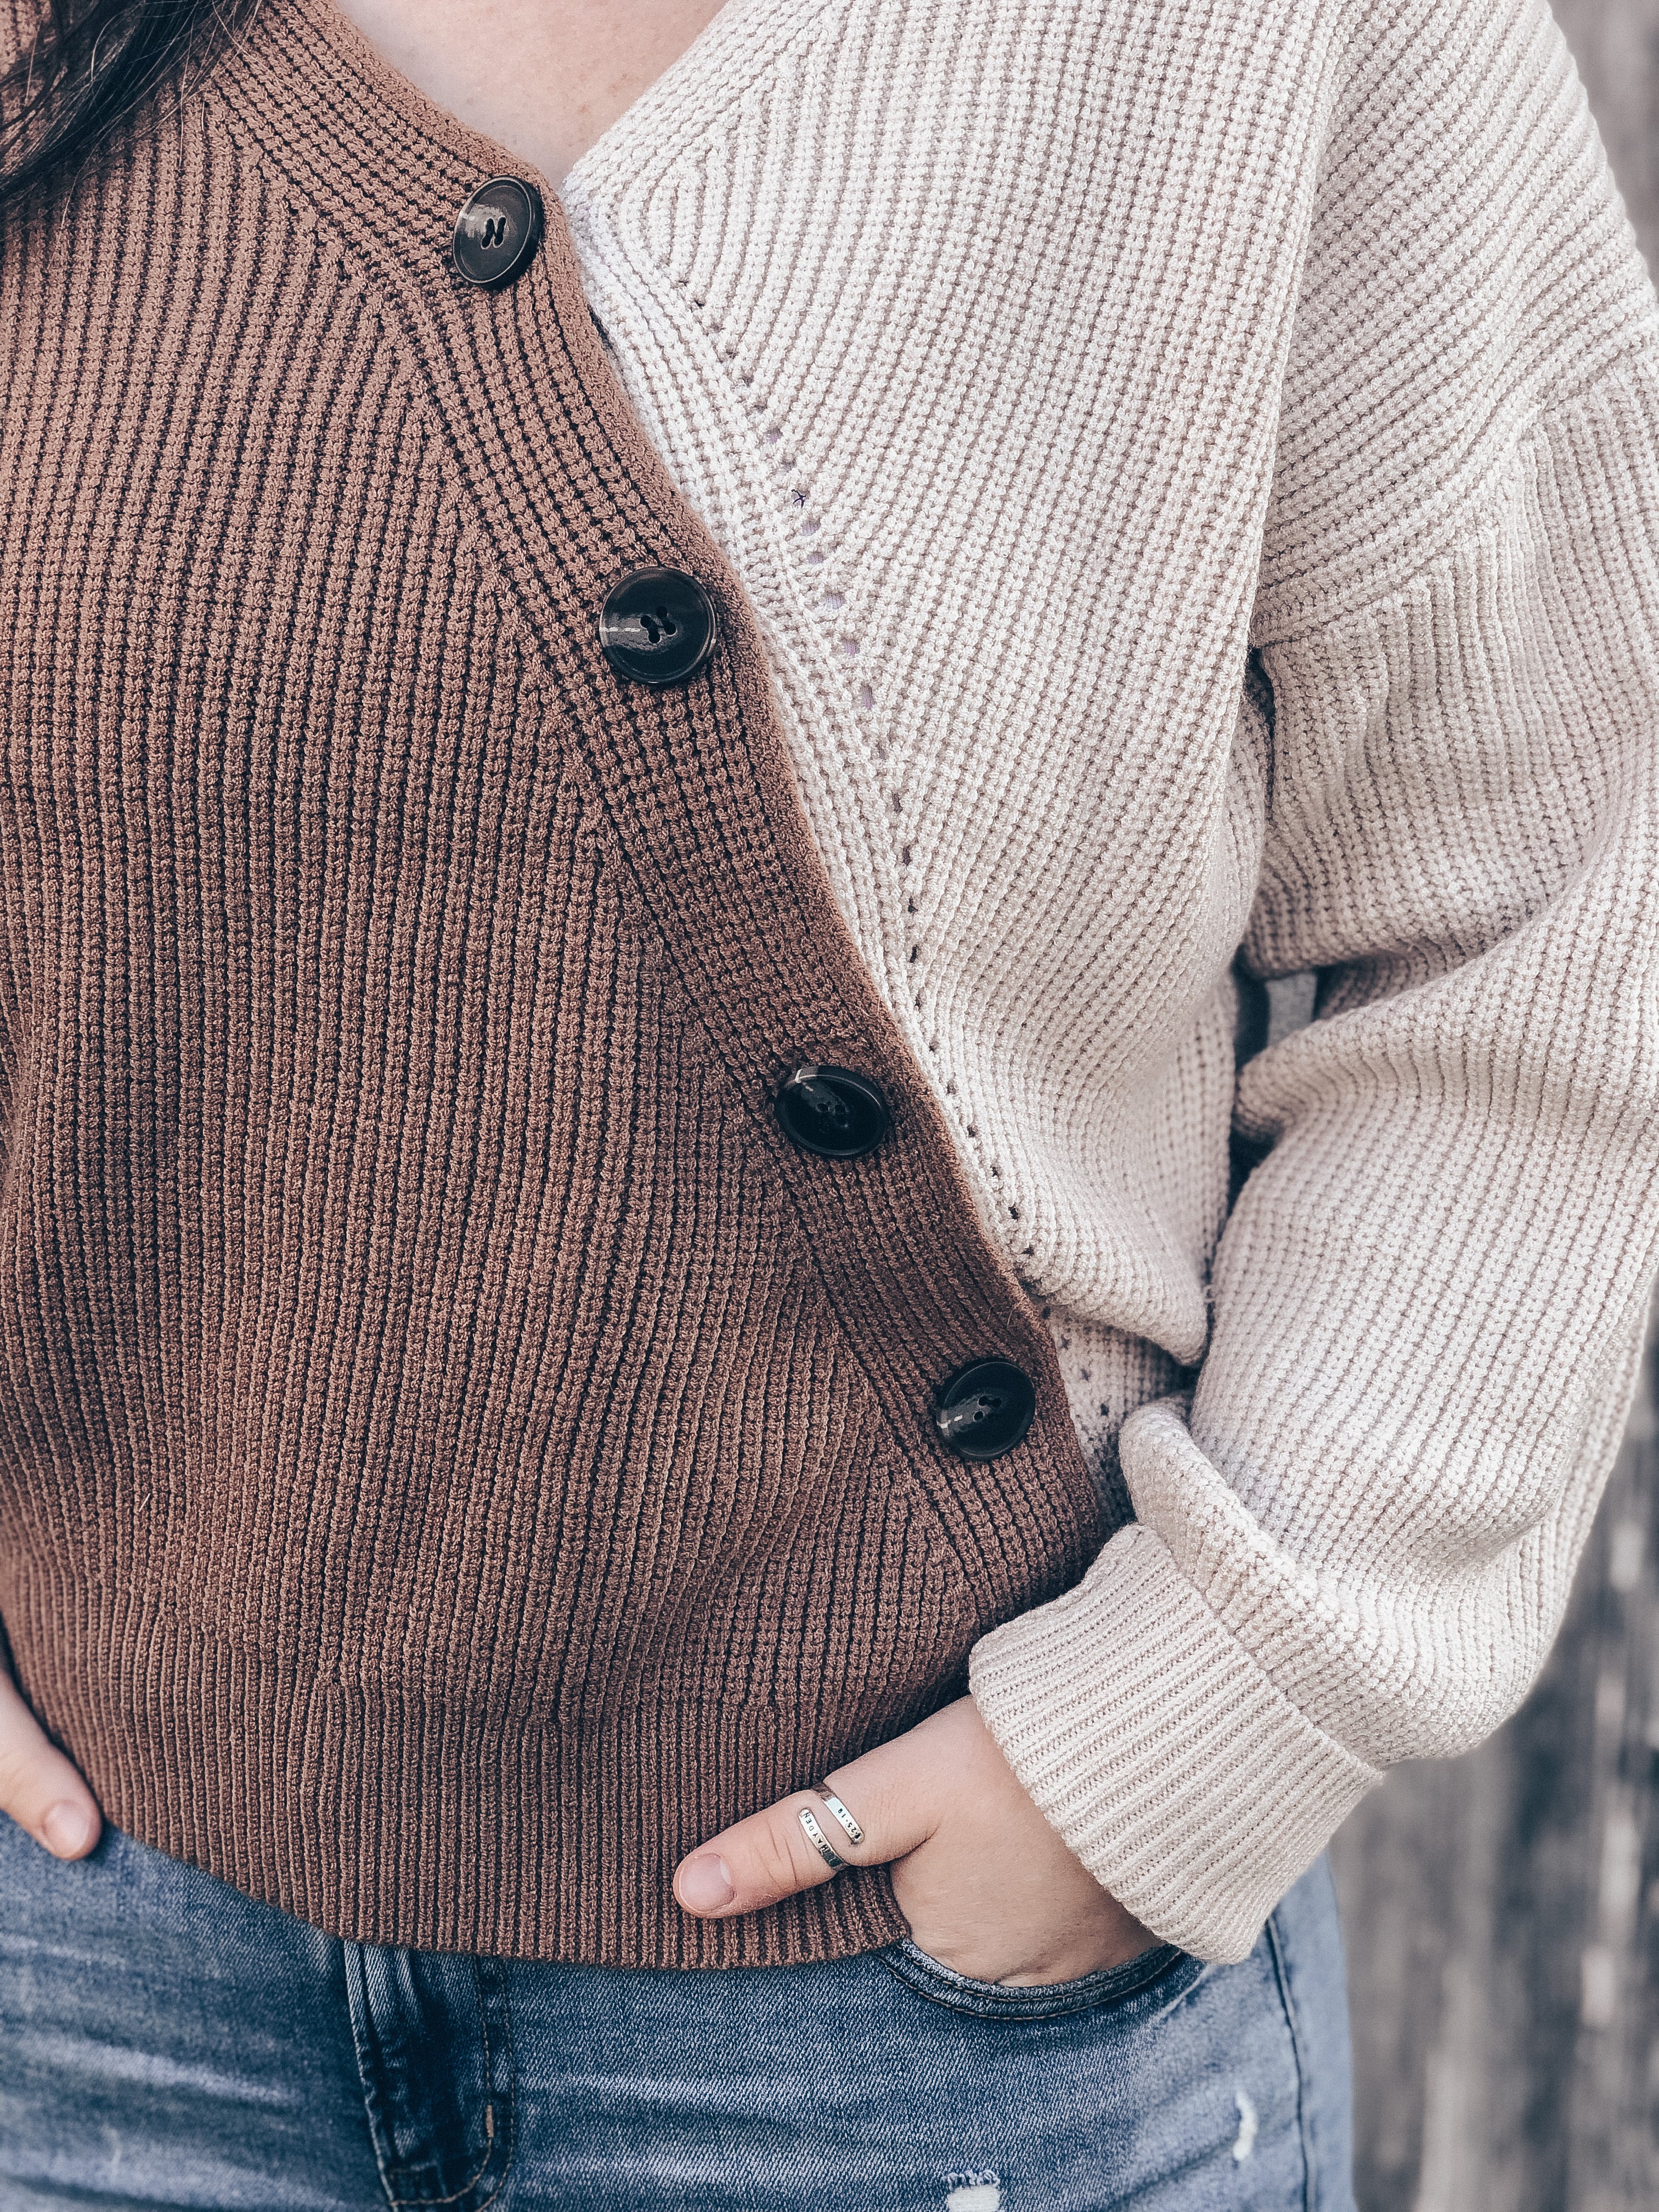 Tan/Taupe Sweater with Buttons